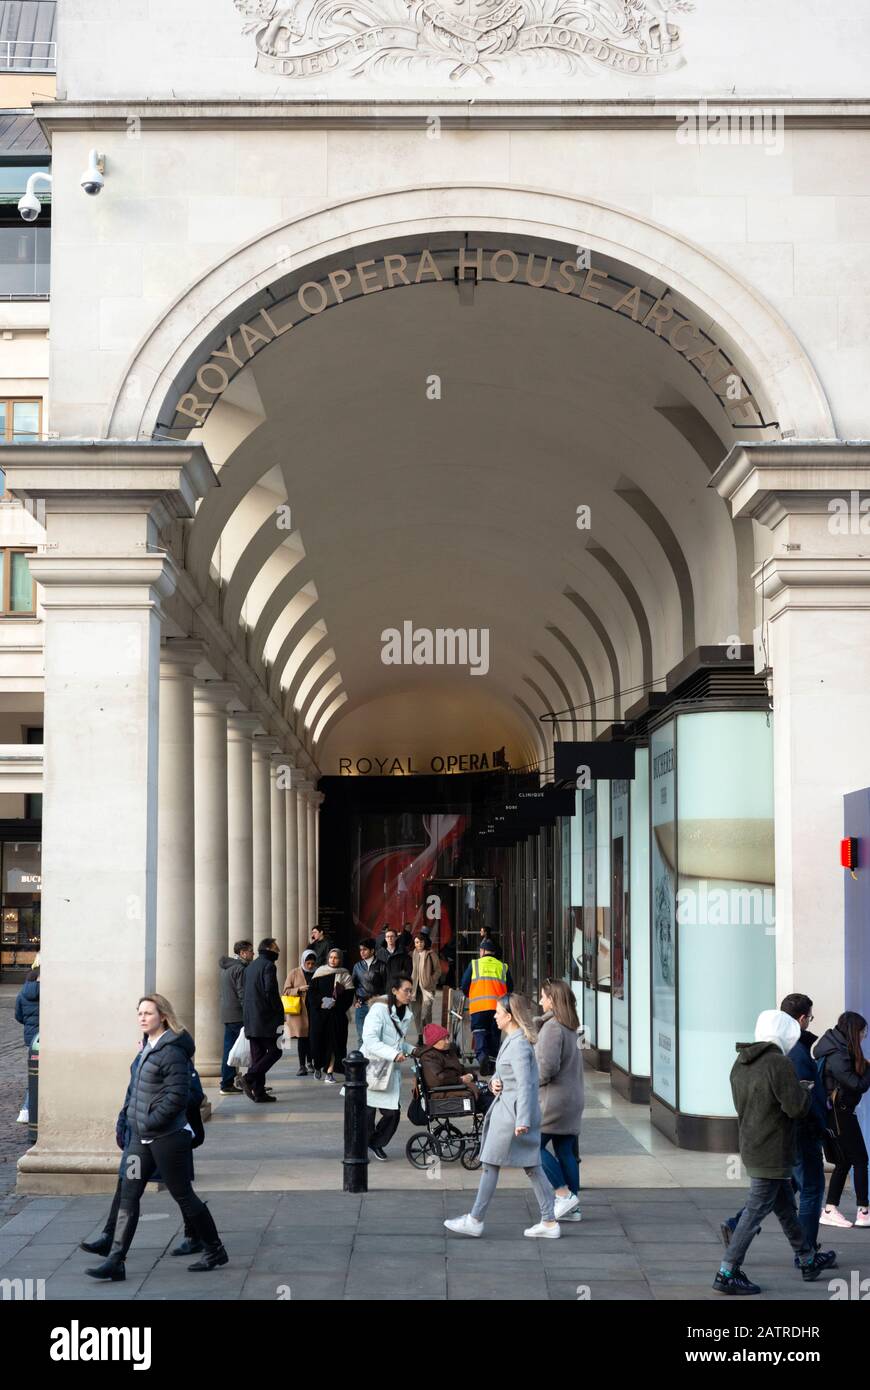 People walking past The Royal Opera House Arcade in Covent Garden, London, United Kingdom as of 2020 Stock Photo